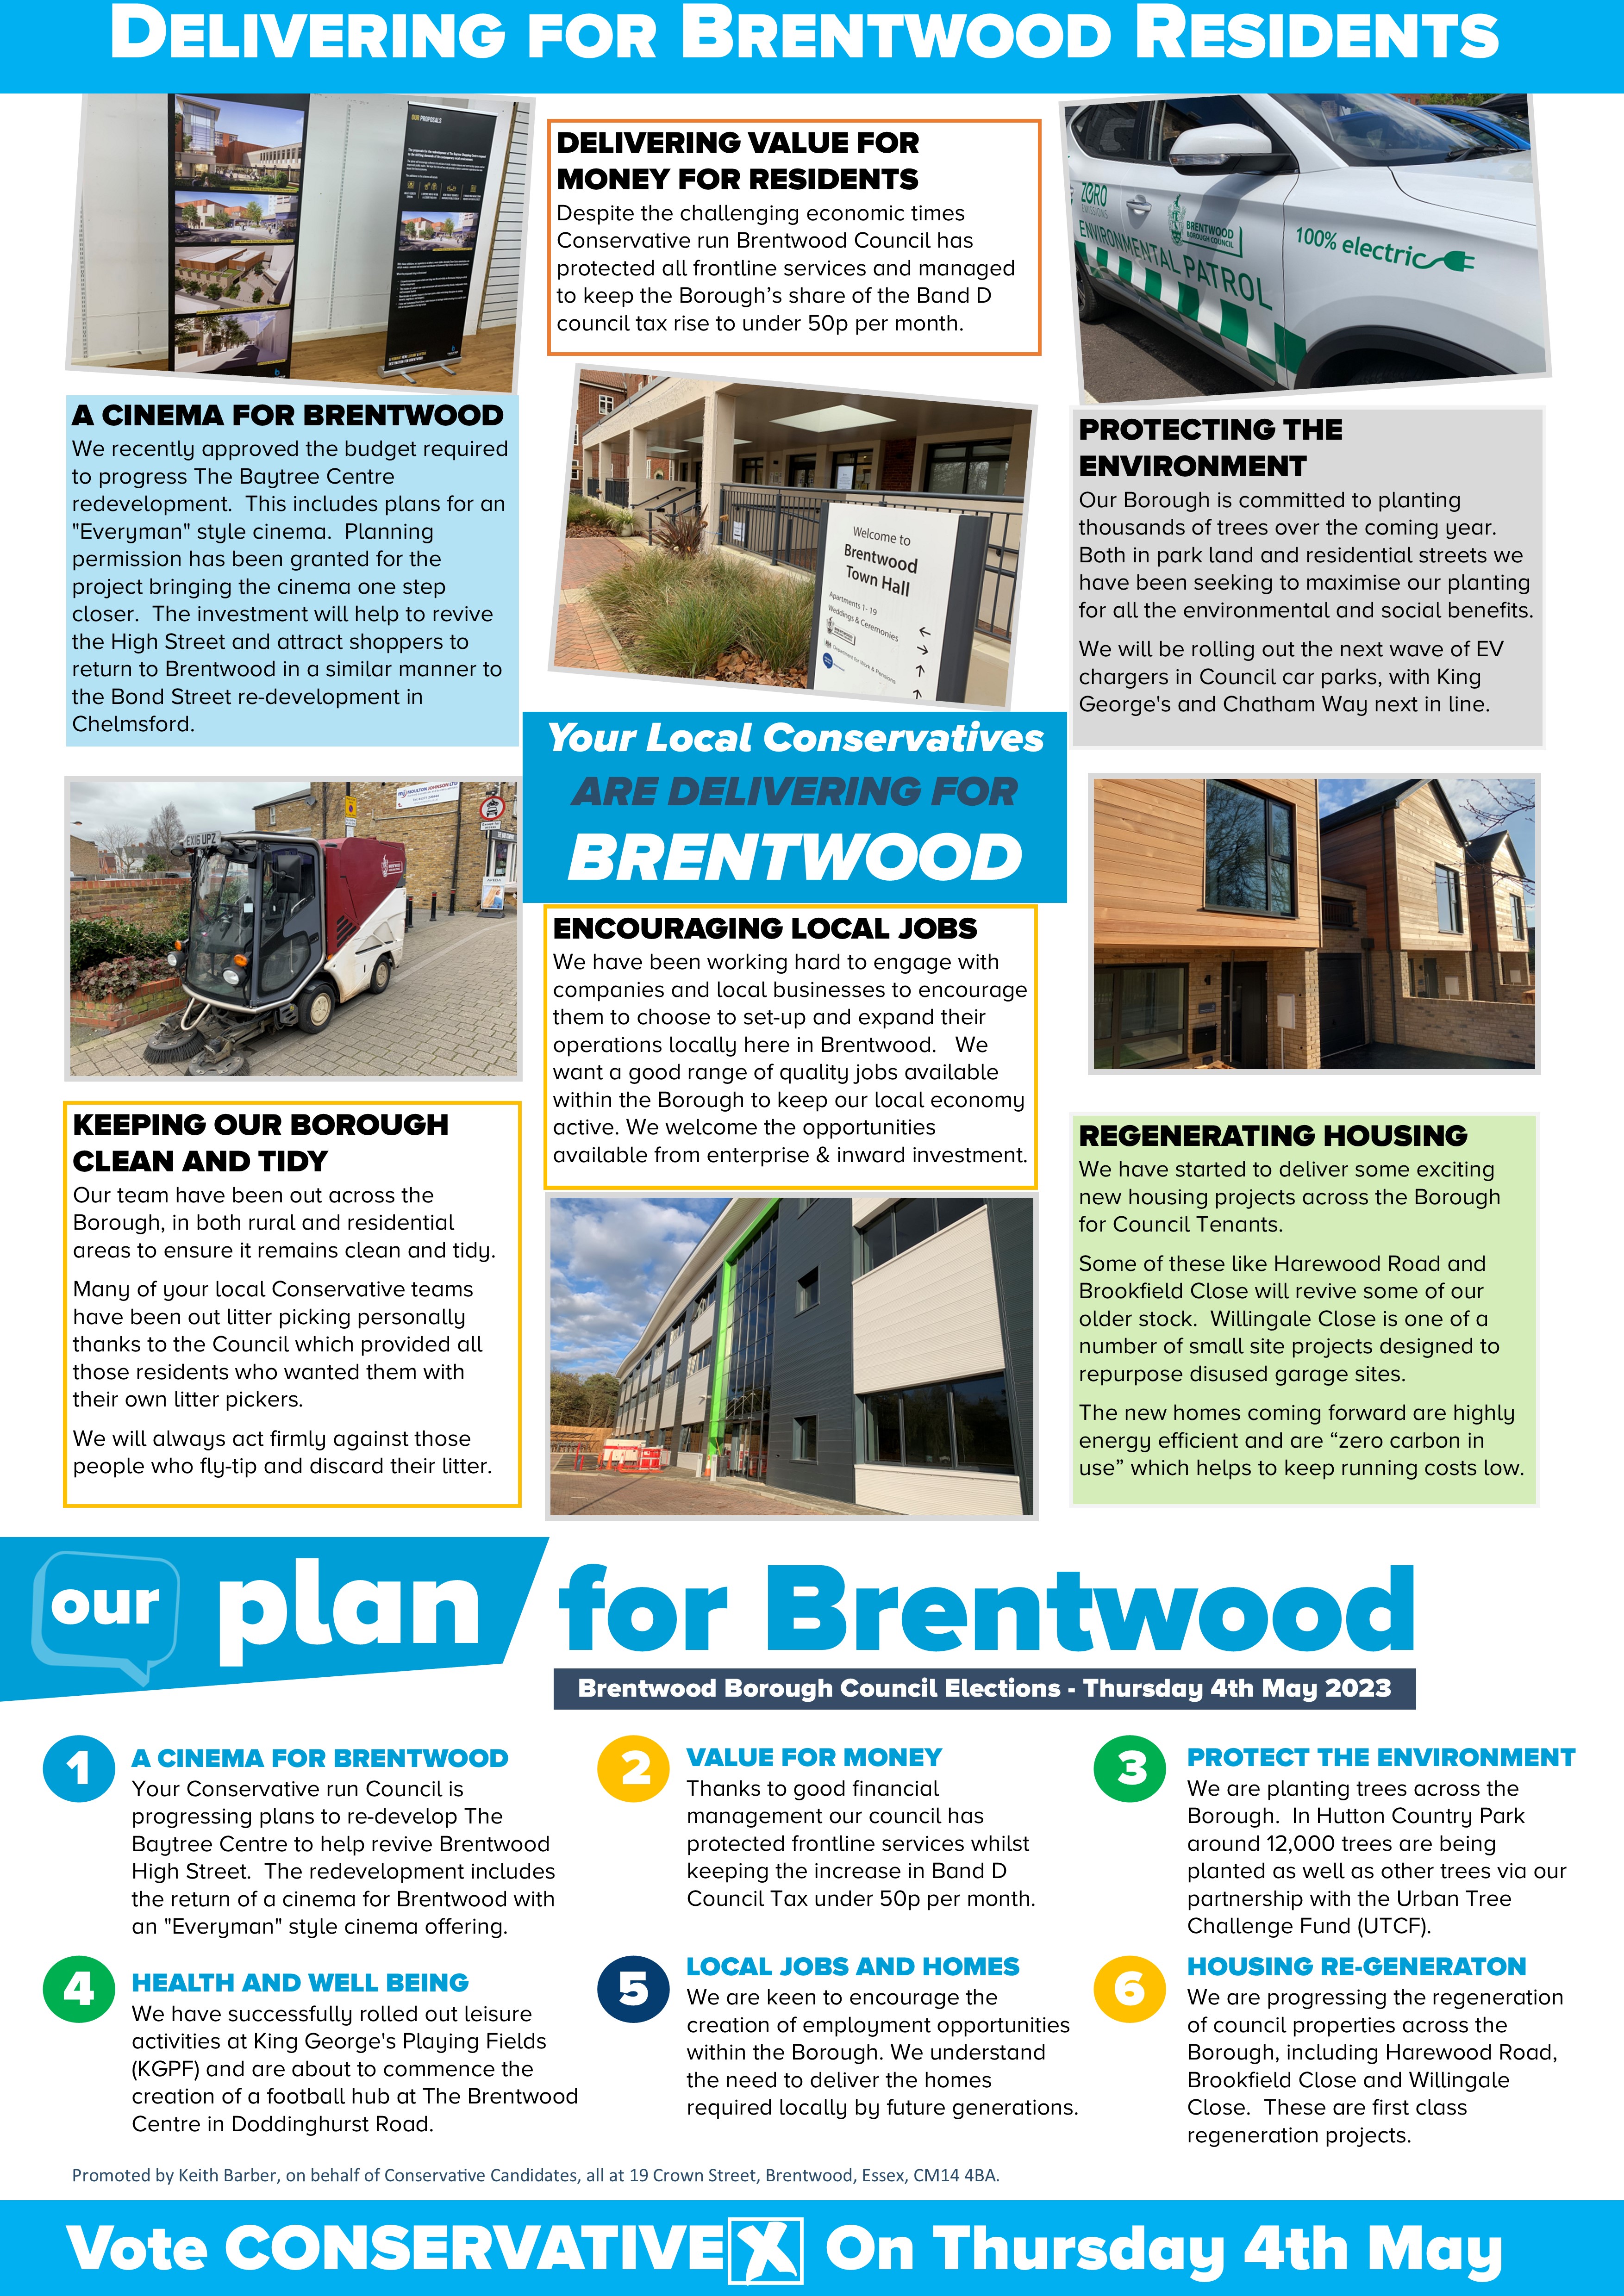 Our Six Point Plan - "Delivering for Brentwood"